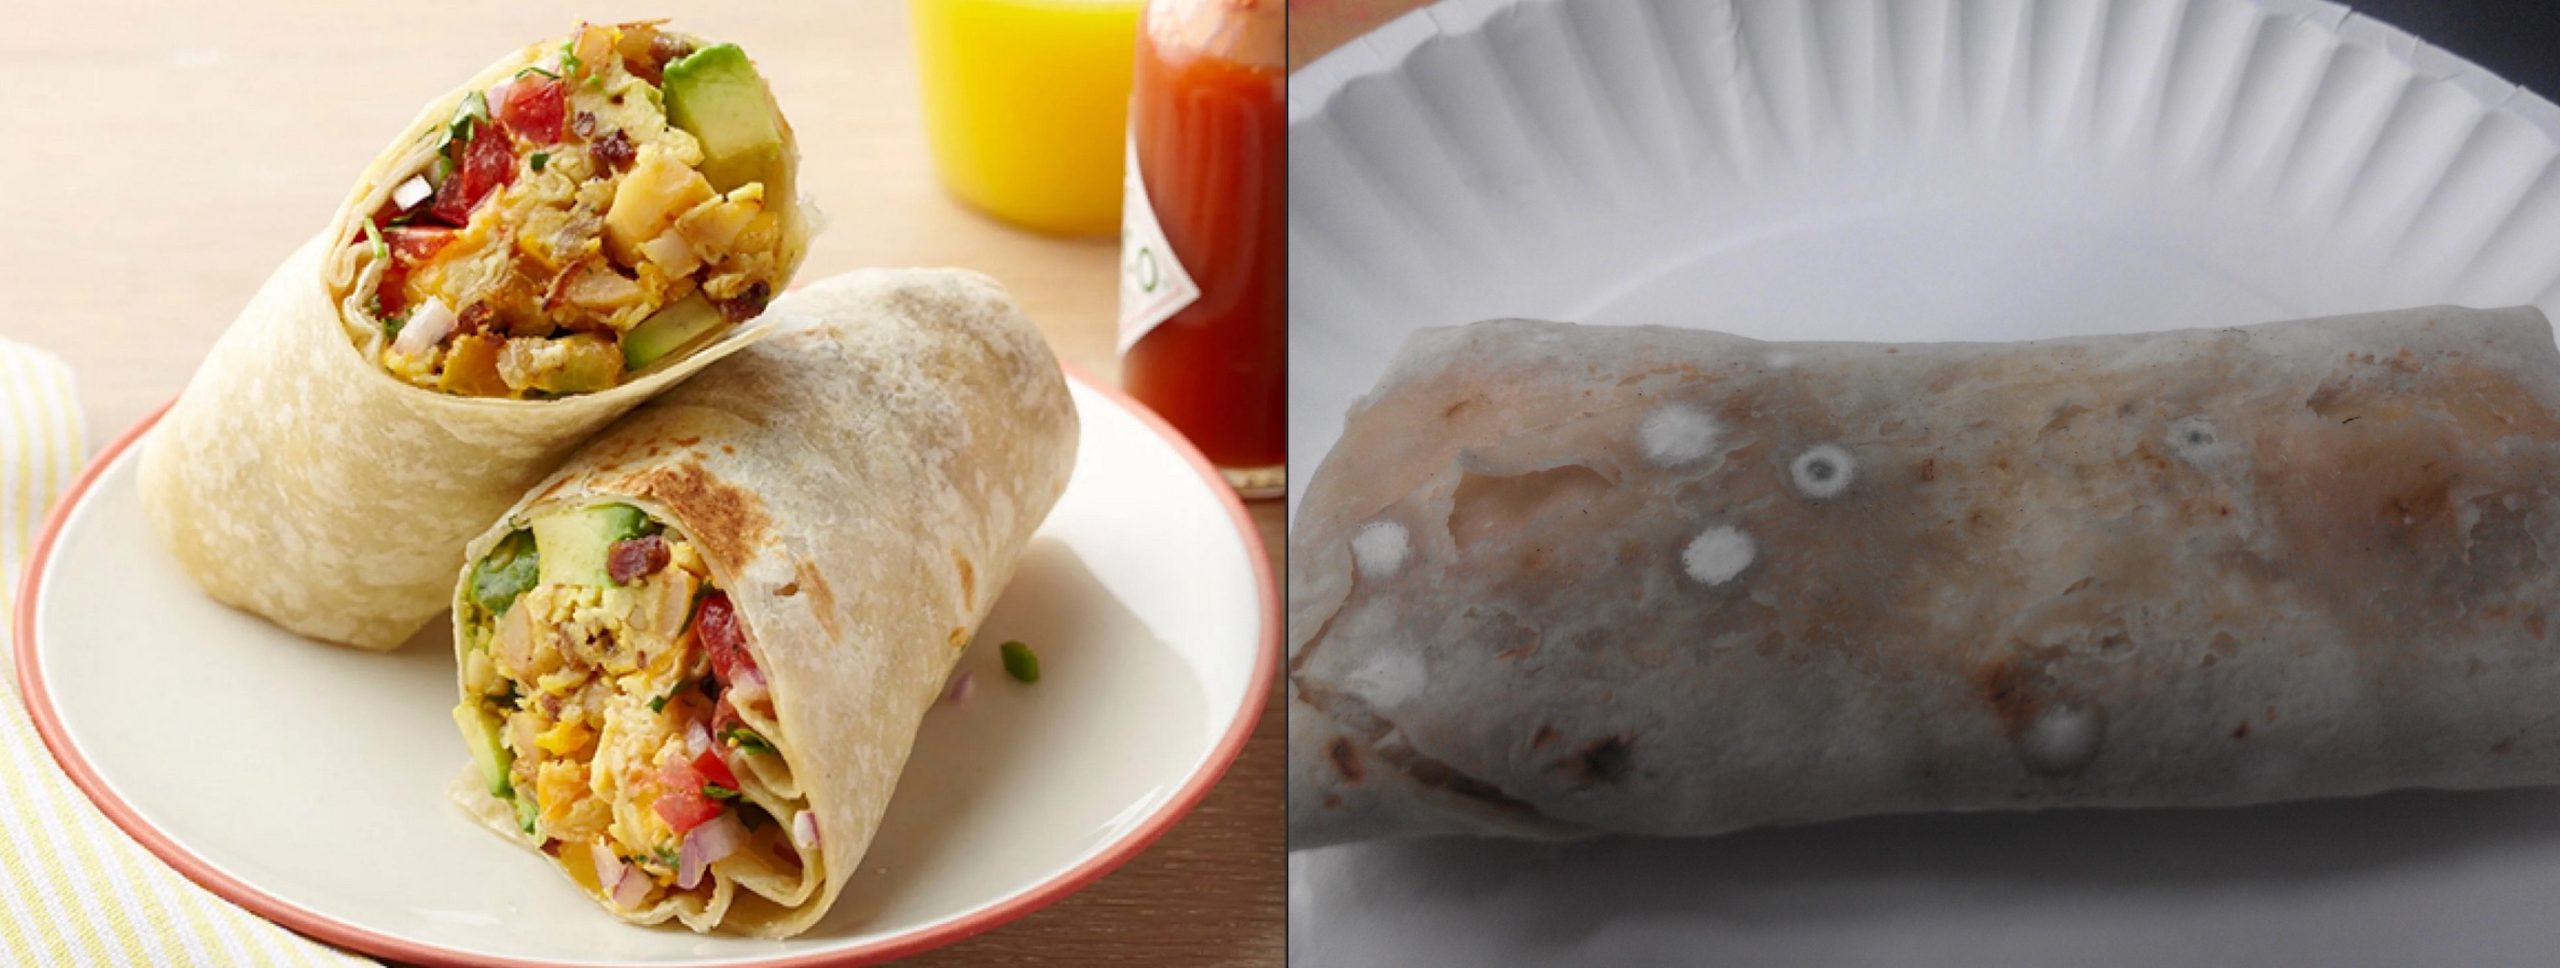 there is a better breakfast burrito